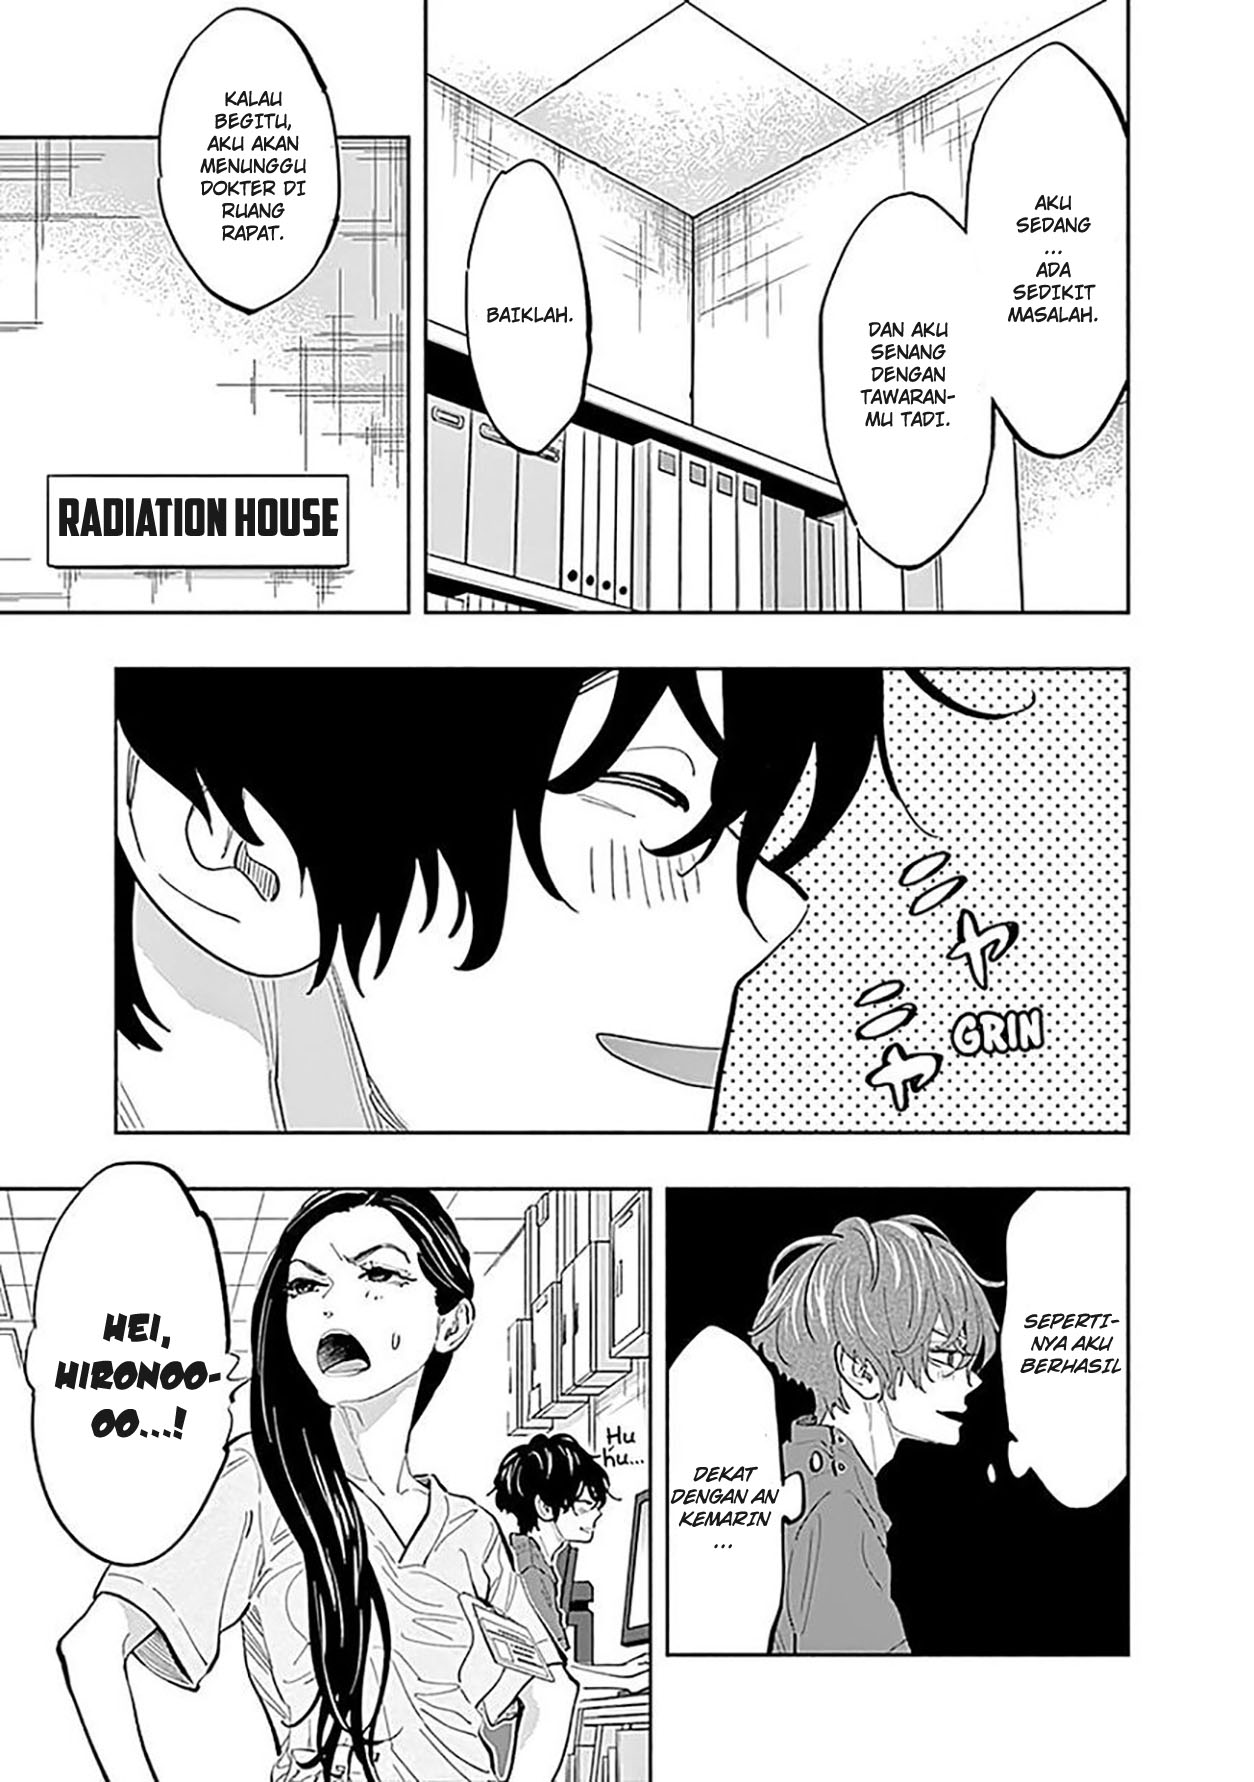 Radiation House Chapter 22